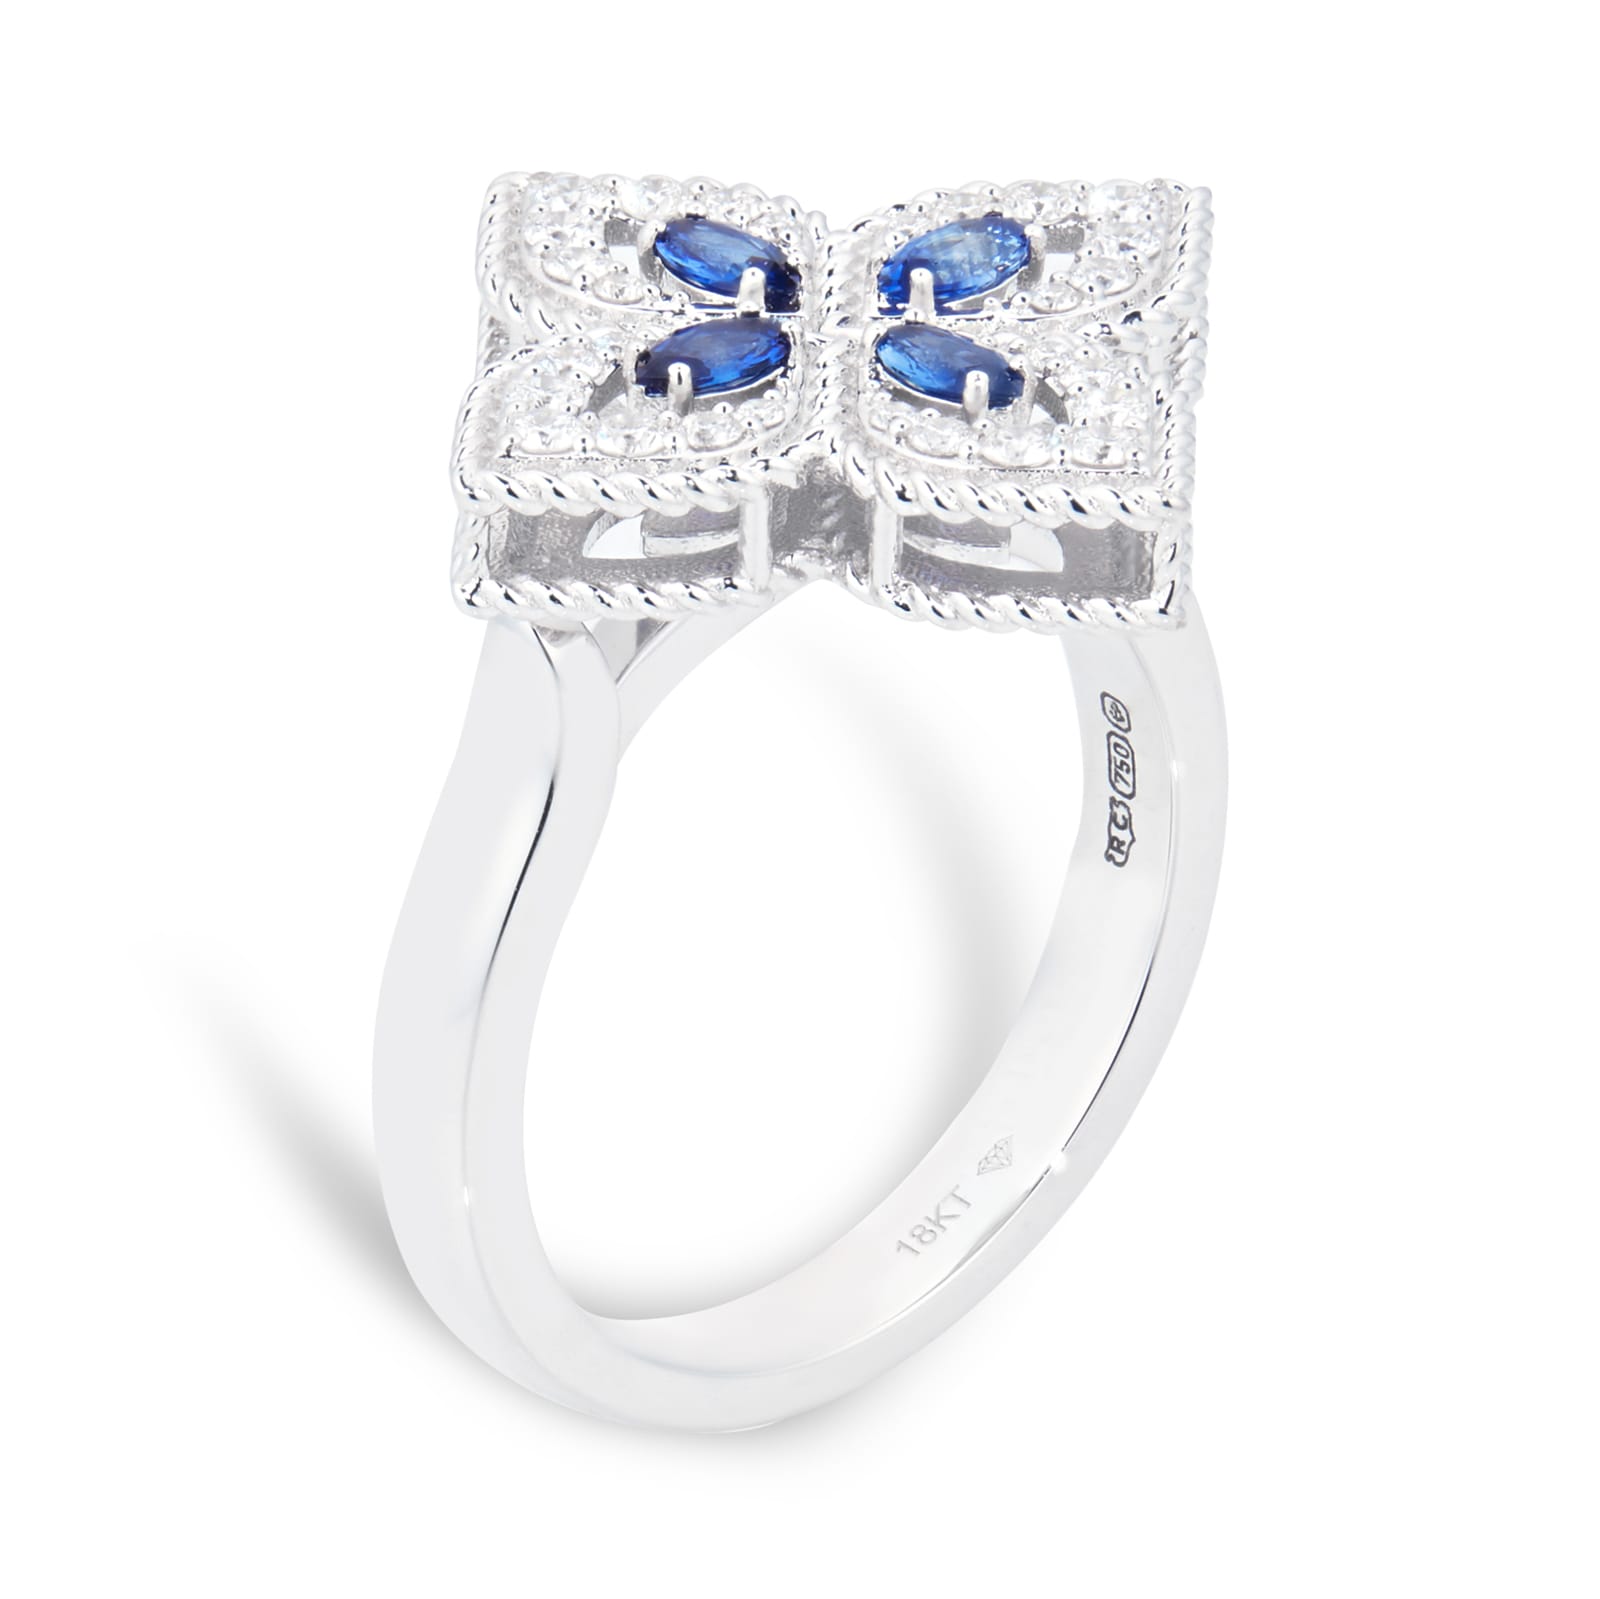 Exclusive 18ct White Gold Princess Flower 0.26ct Diamond & Sapphire Ring - Ring Size P